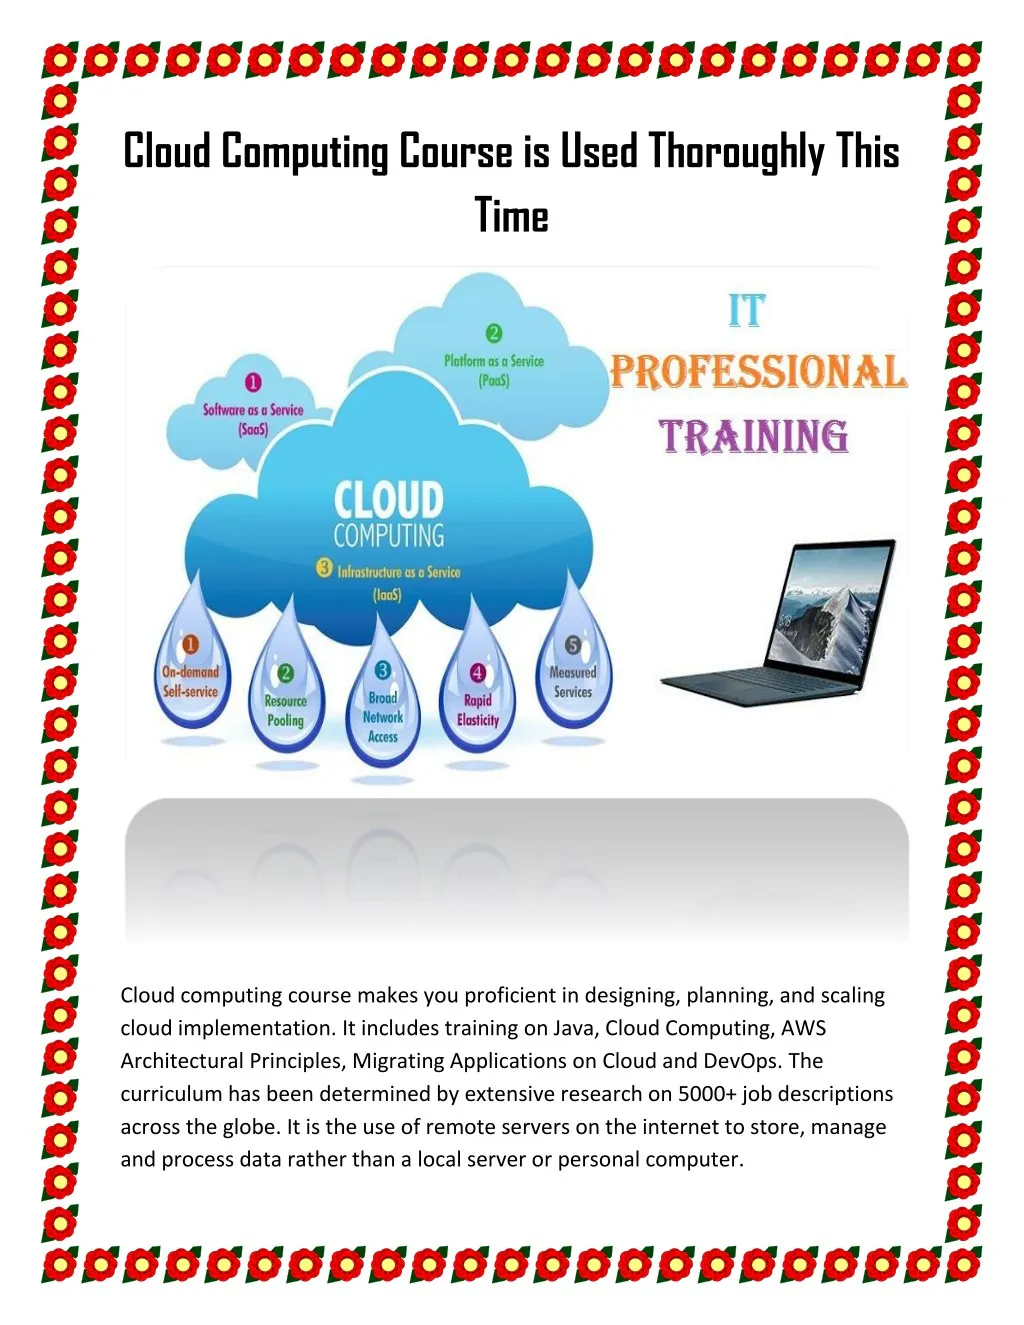 cloud computing course is used thoroughly this